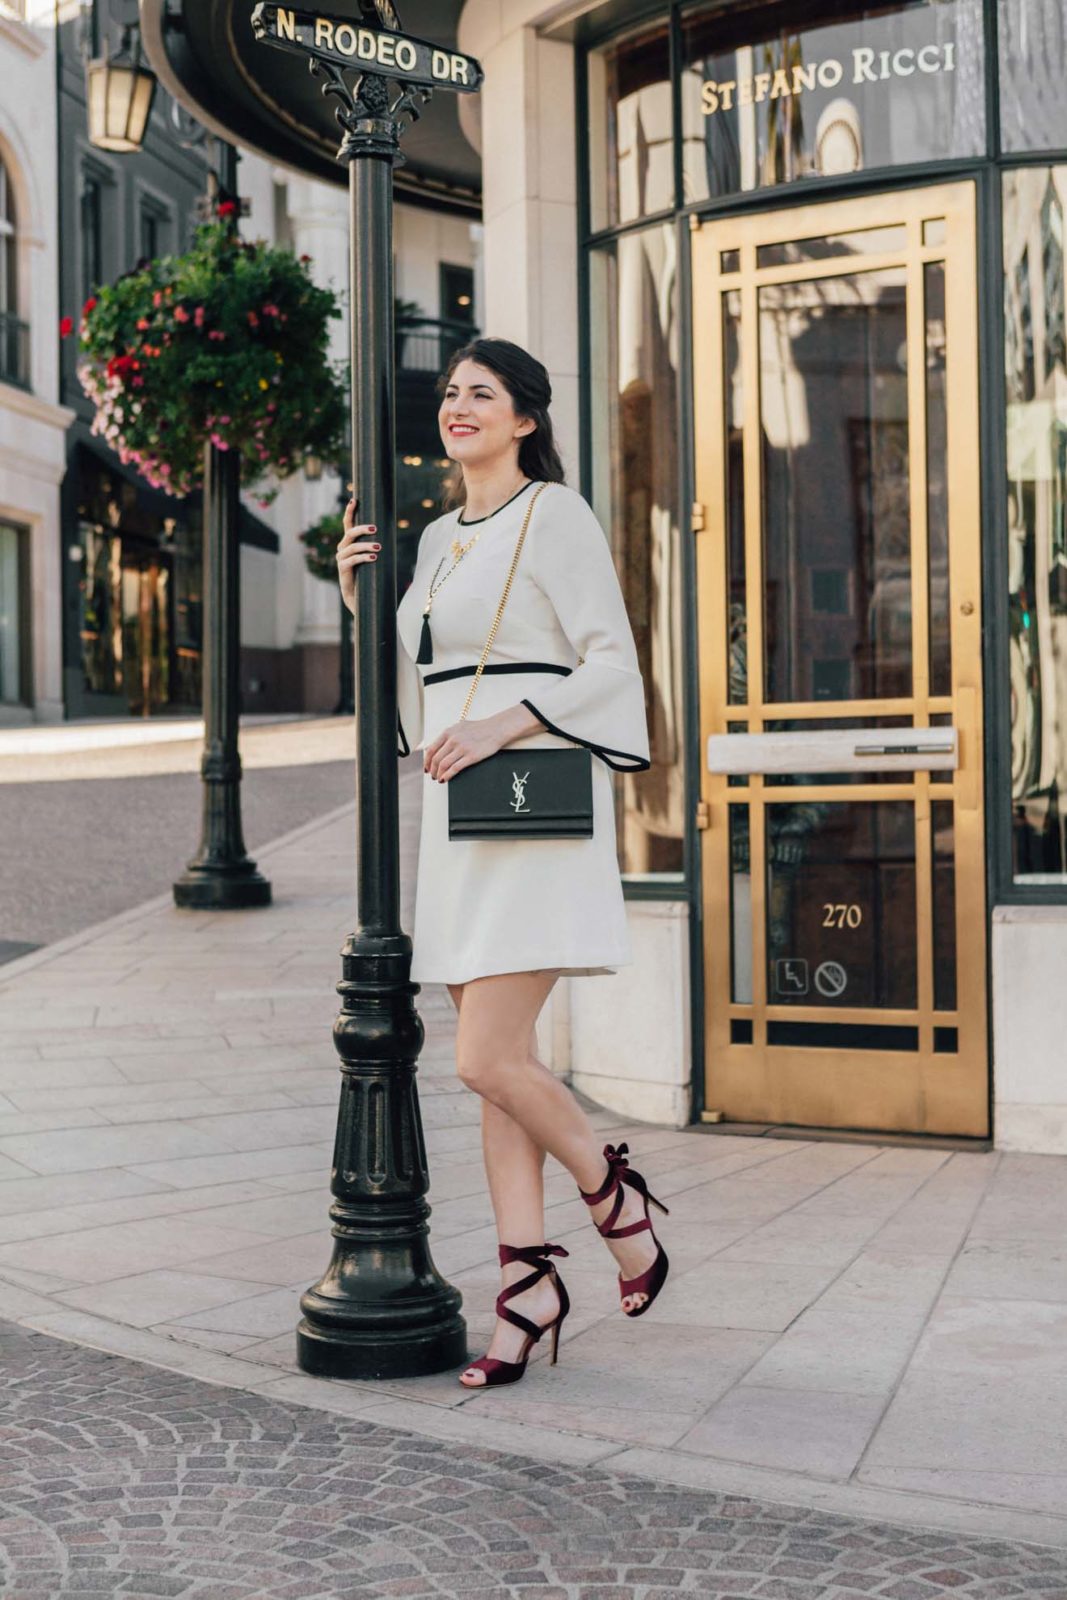 Nordstrom Holiday Shoes | Velvet heels | White Eliza J | Bell Sleeve Dress | 12 Days of Holiday Style: Red Velvet Heels featured by top Los Angeles fashion blog Laura Lily